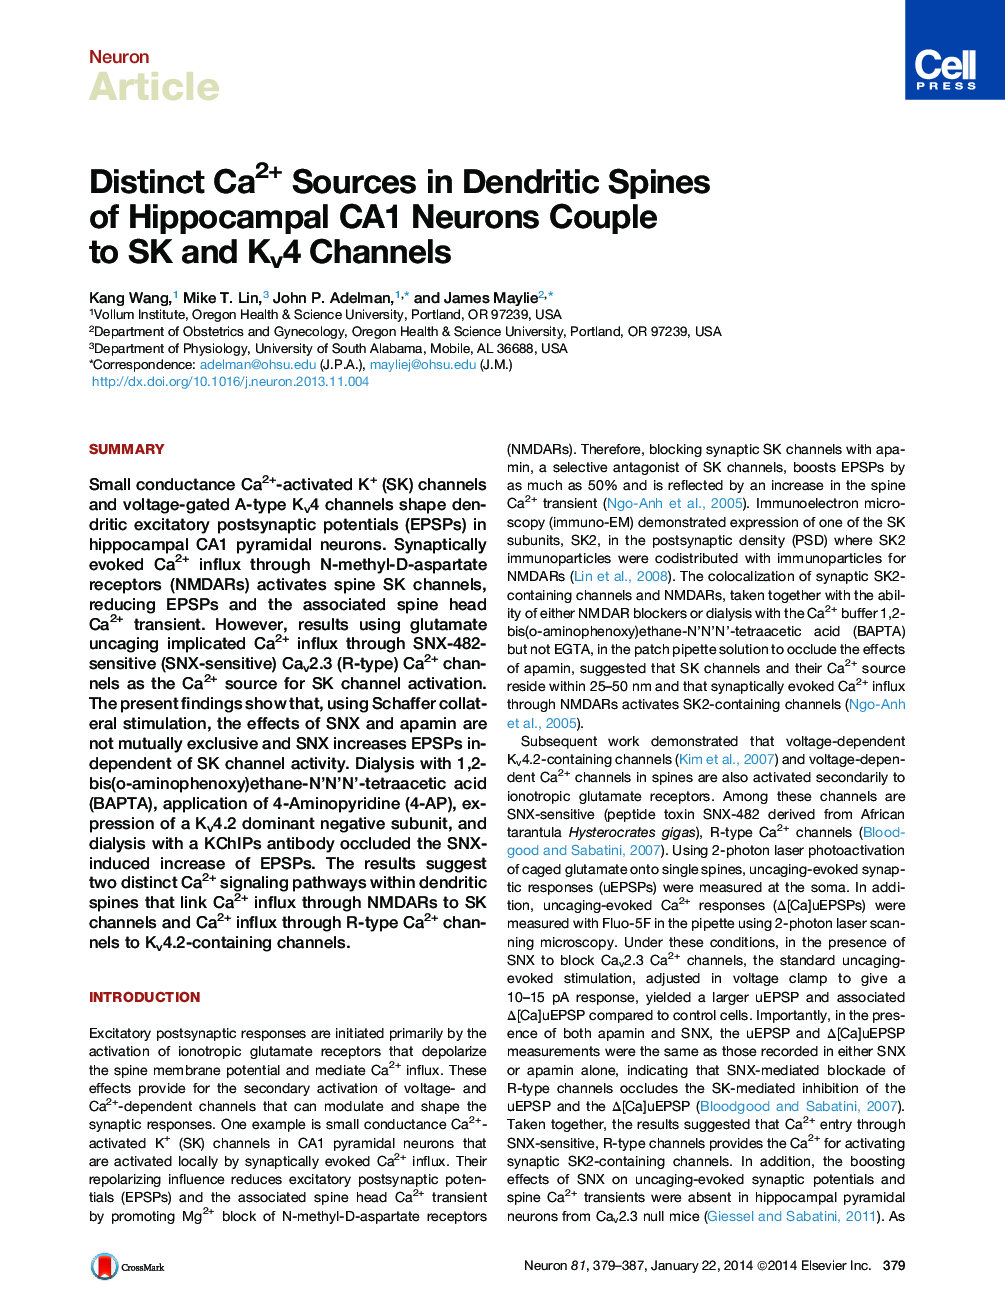 Distinct Ca2+ Sources in Dendritic Spines of Hippocampal CA1 Neurons Couple to SK and Kv4 Channels